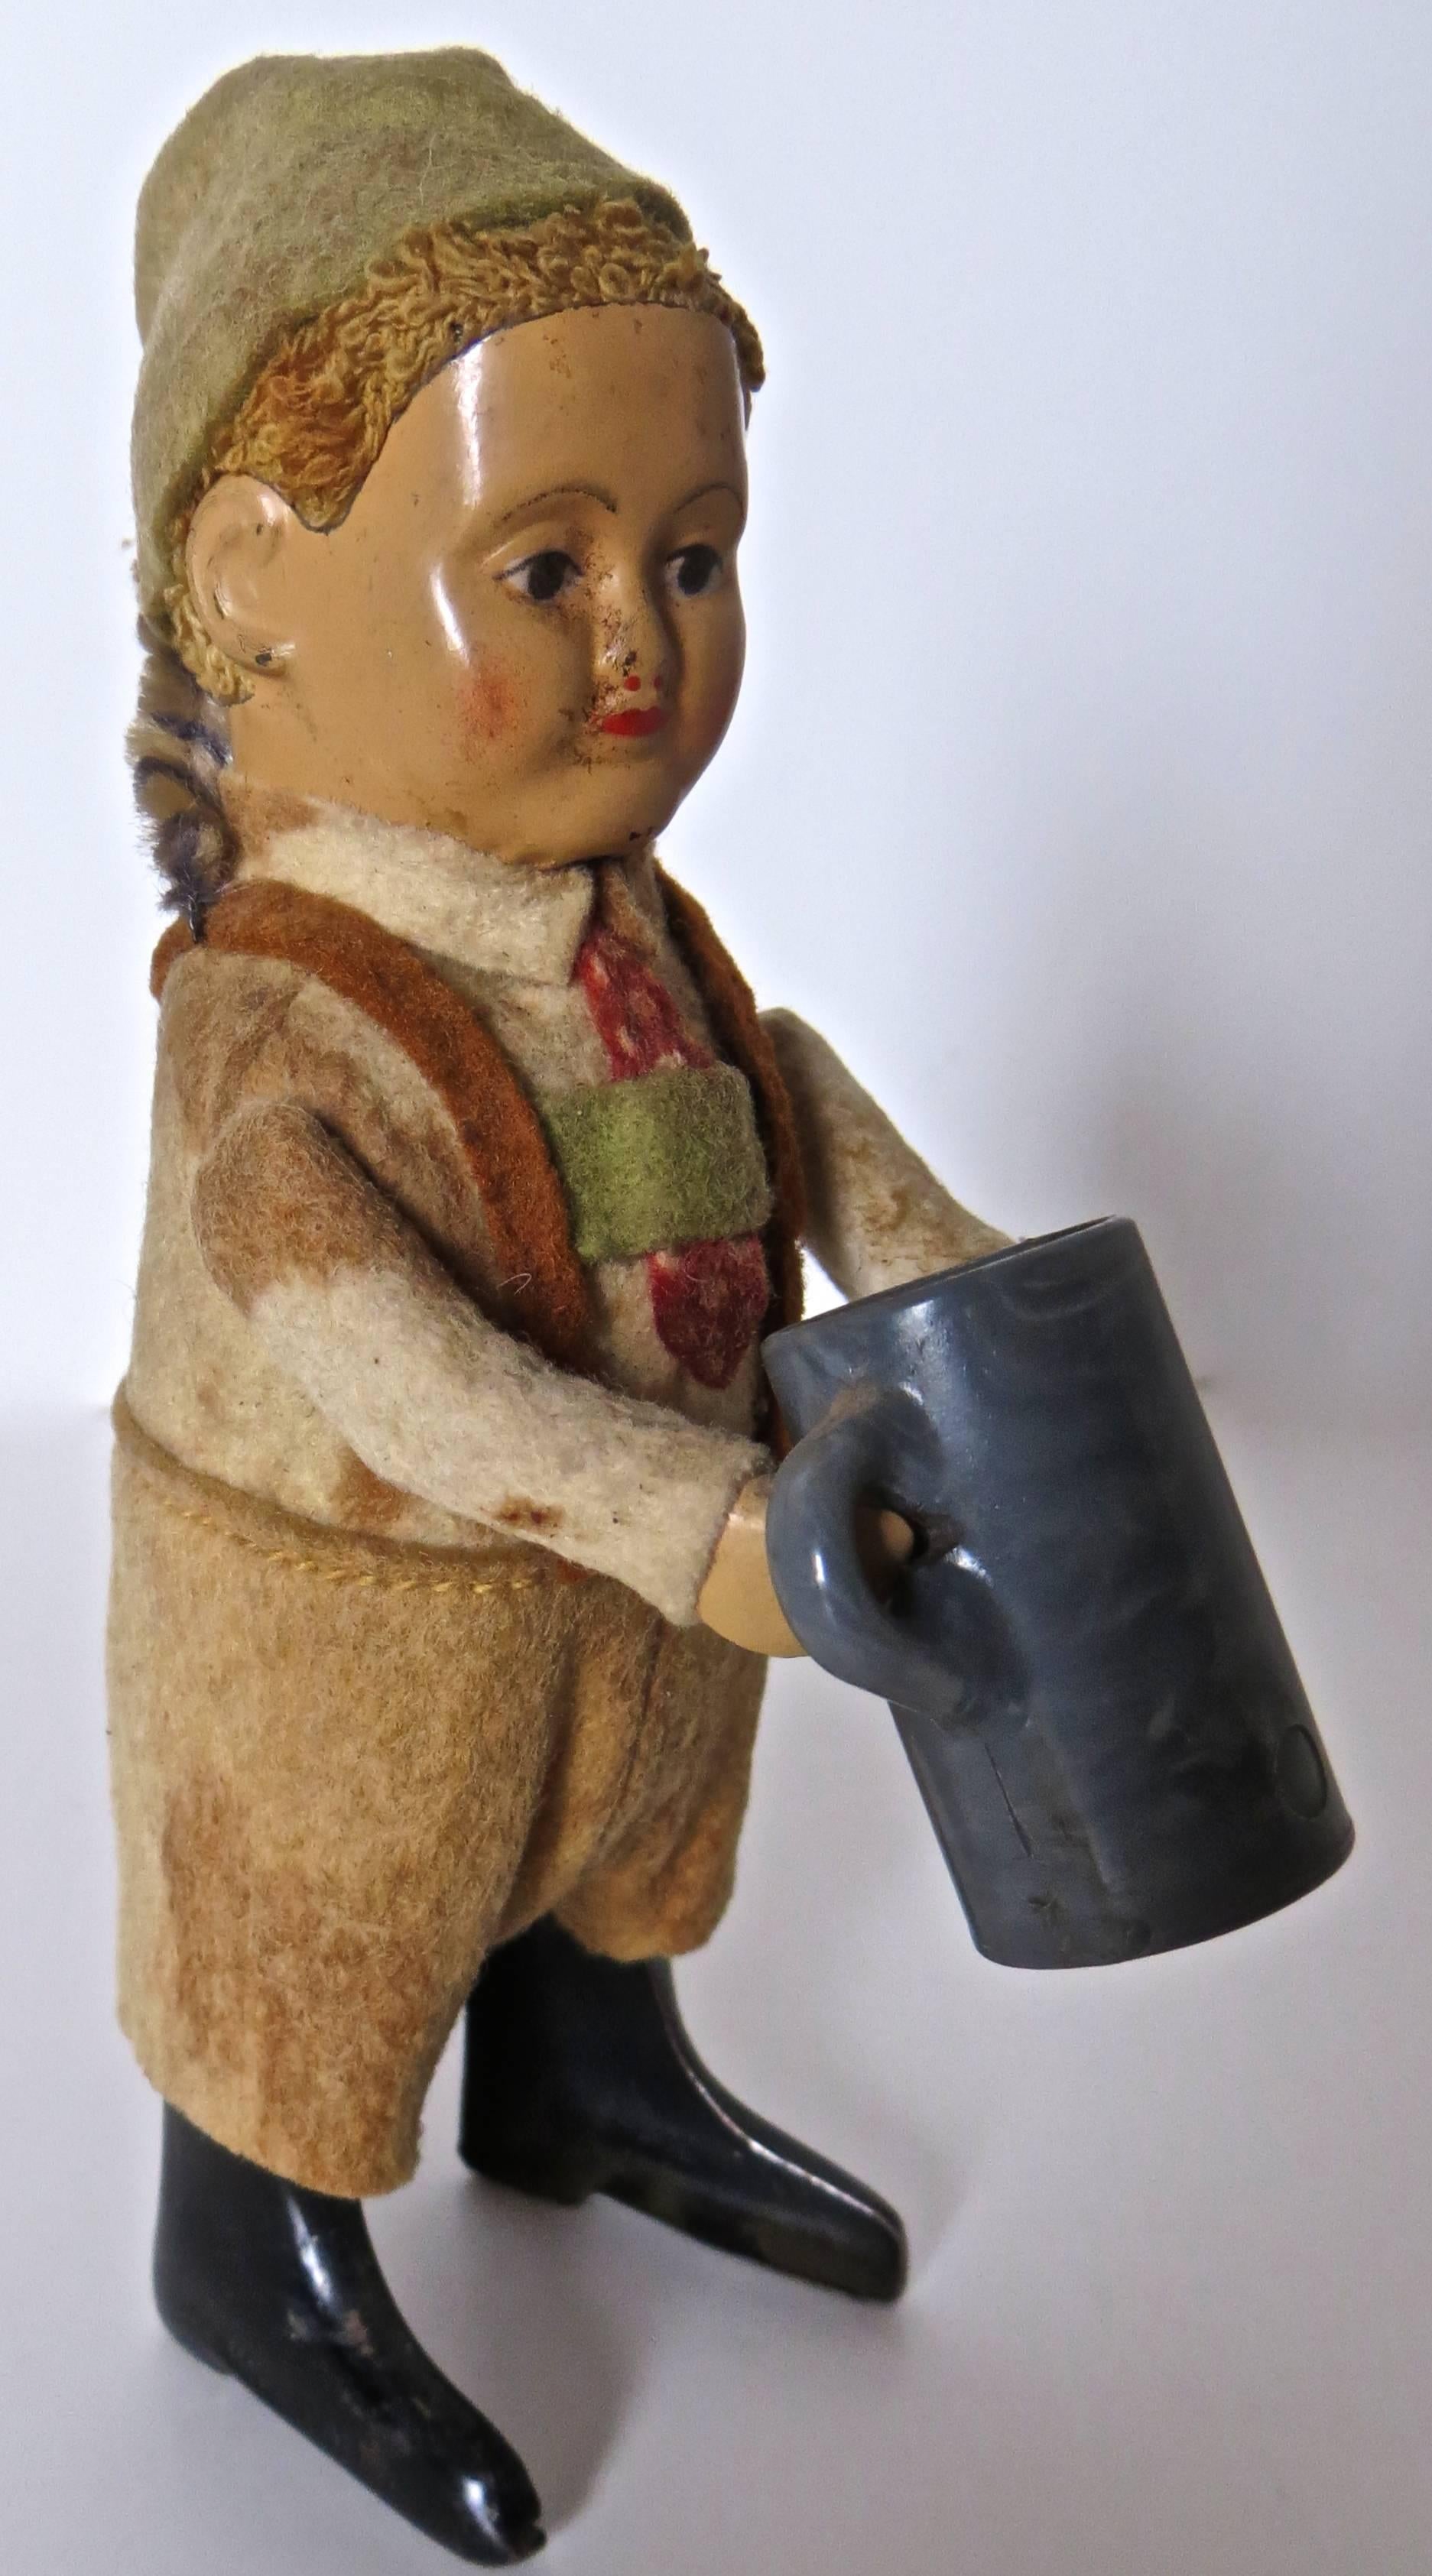 Entertaining clockwork toy that when wound up starts young German boy dancing and drinking from his beer mug. Near mint condition for this toy manufactured by the Schuco Company of Germany, circa 1940's. Hand painted metal face has a porcelain like